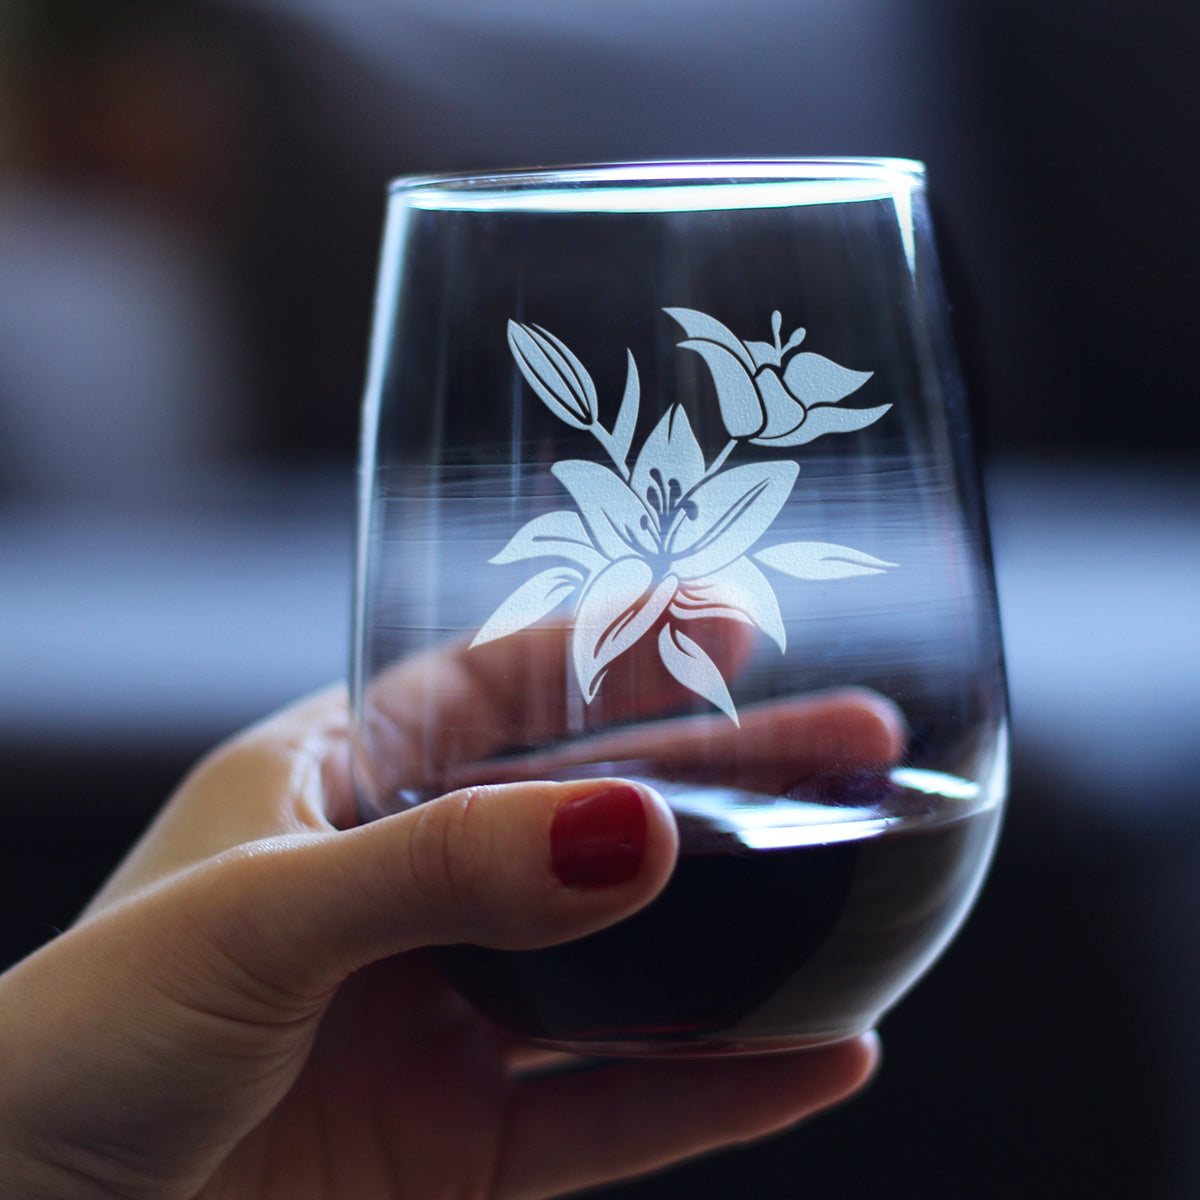 Lily Stemless Wine Glass - Floral Themed Decor and Gifts for Flower Lovers - Large 17 Oz Glasses